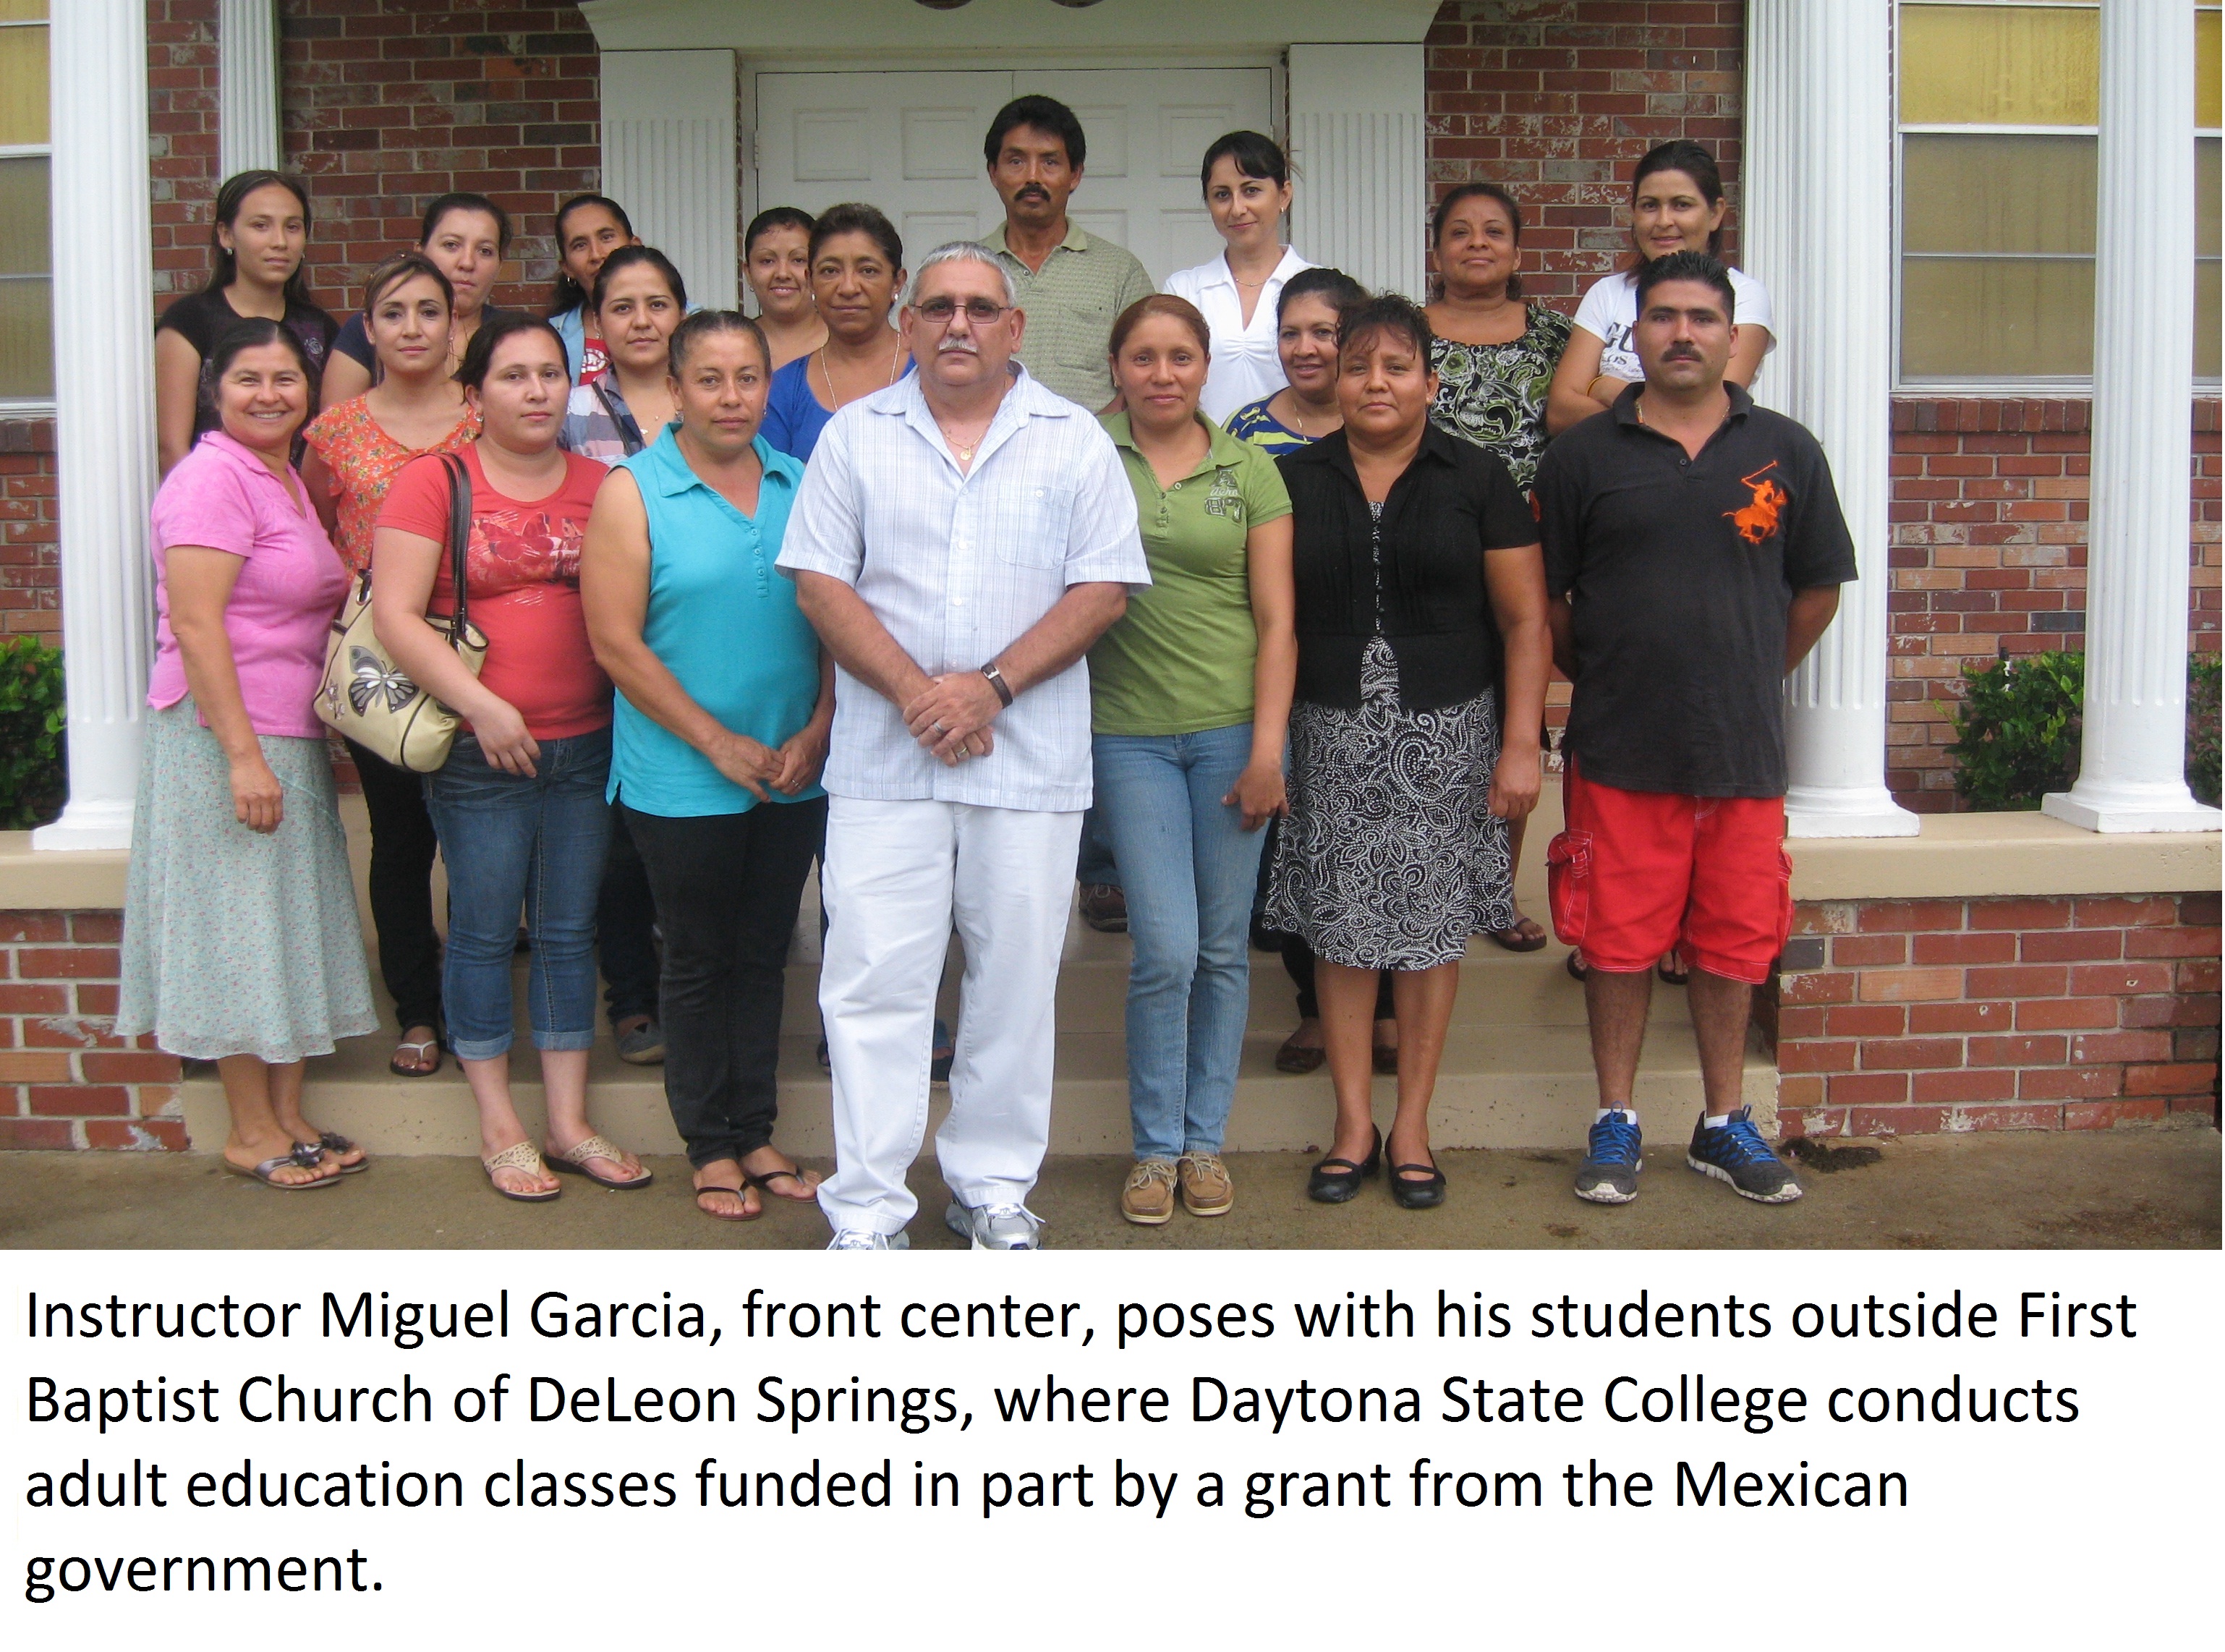 Instructor Miguel Garcia, front center, poses with his students outside First Baptist Church of DeLeon Springs, where Daytona State College conducts adult education classes funded in part by a grant from the Mexican government.